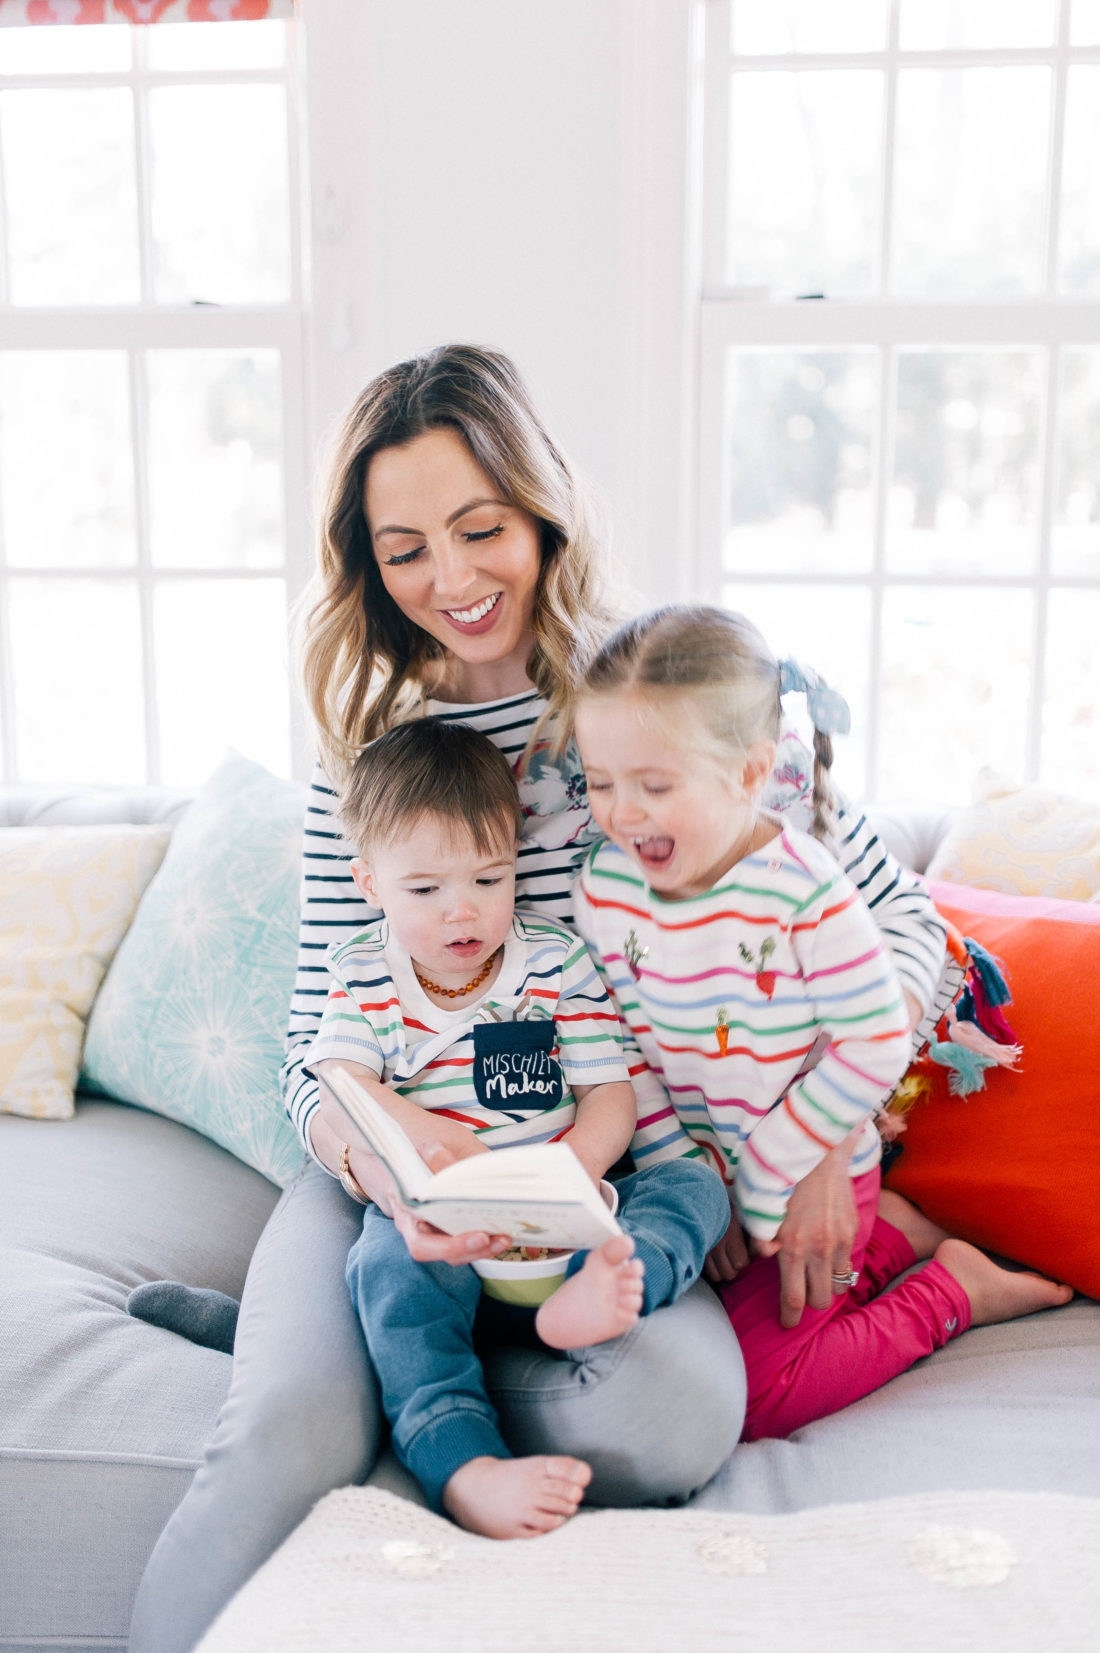 Eva Amurri Martino wears stripes and reads the Peter RAbbit book to her children on the couch at home in Connecticut